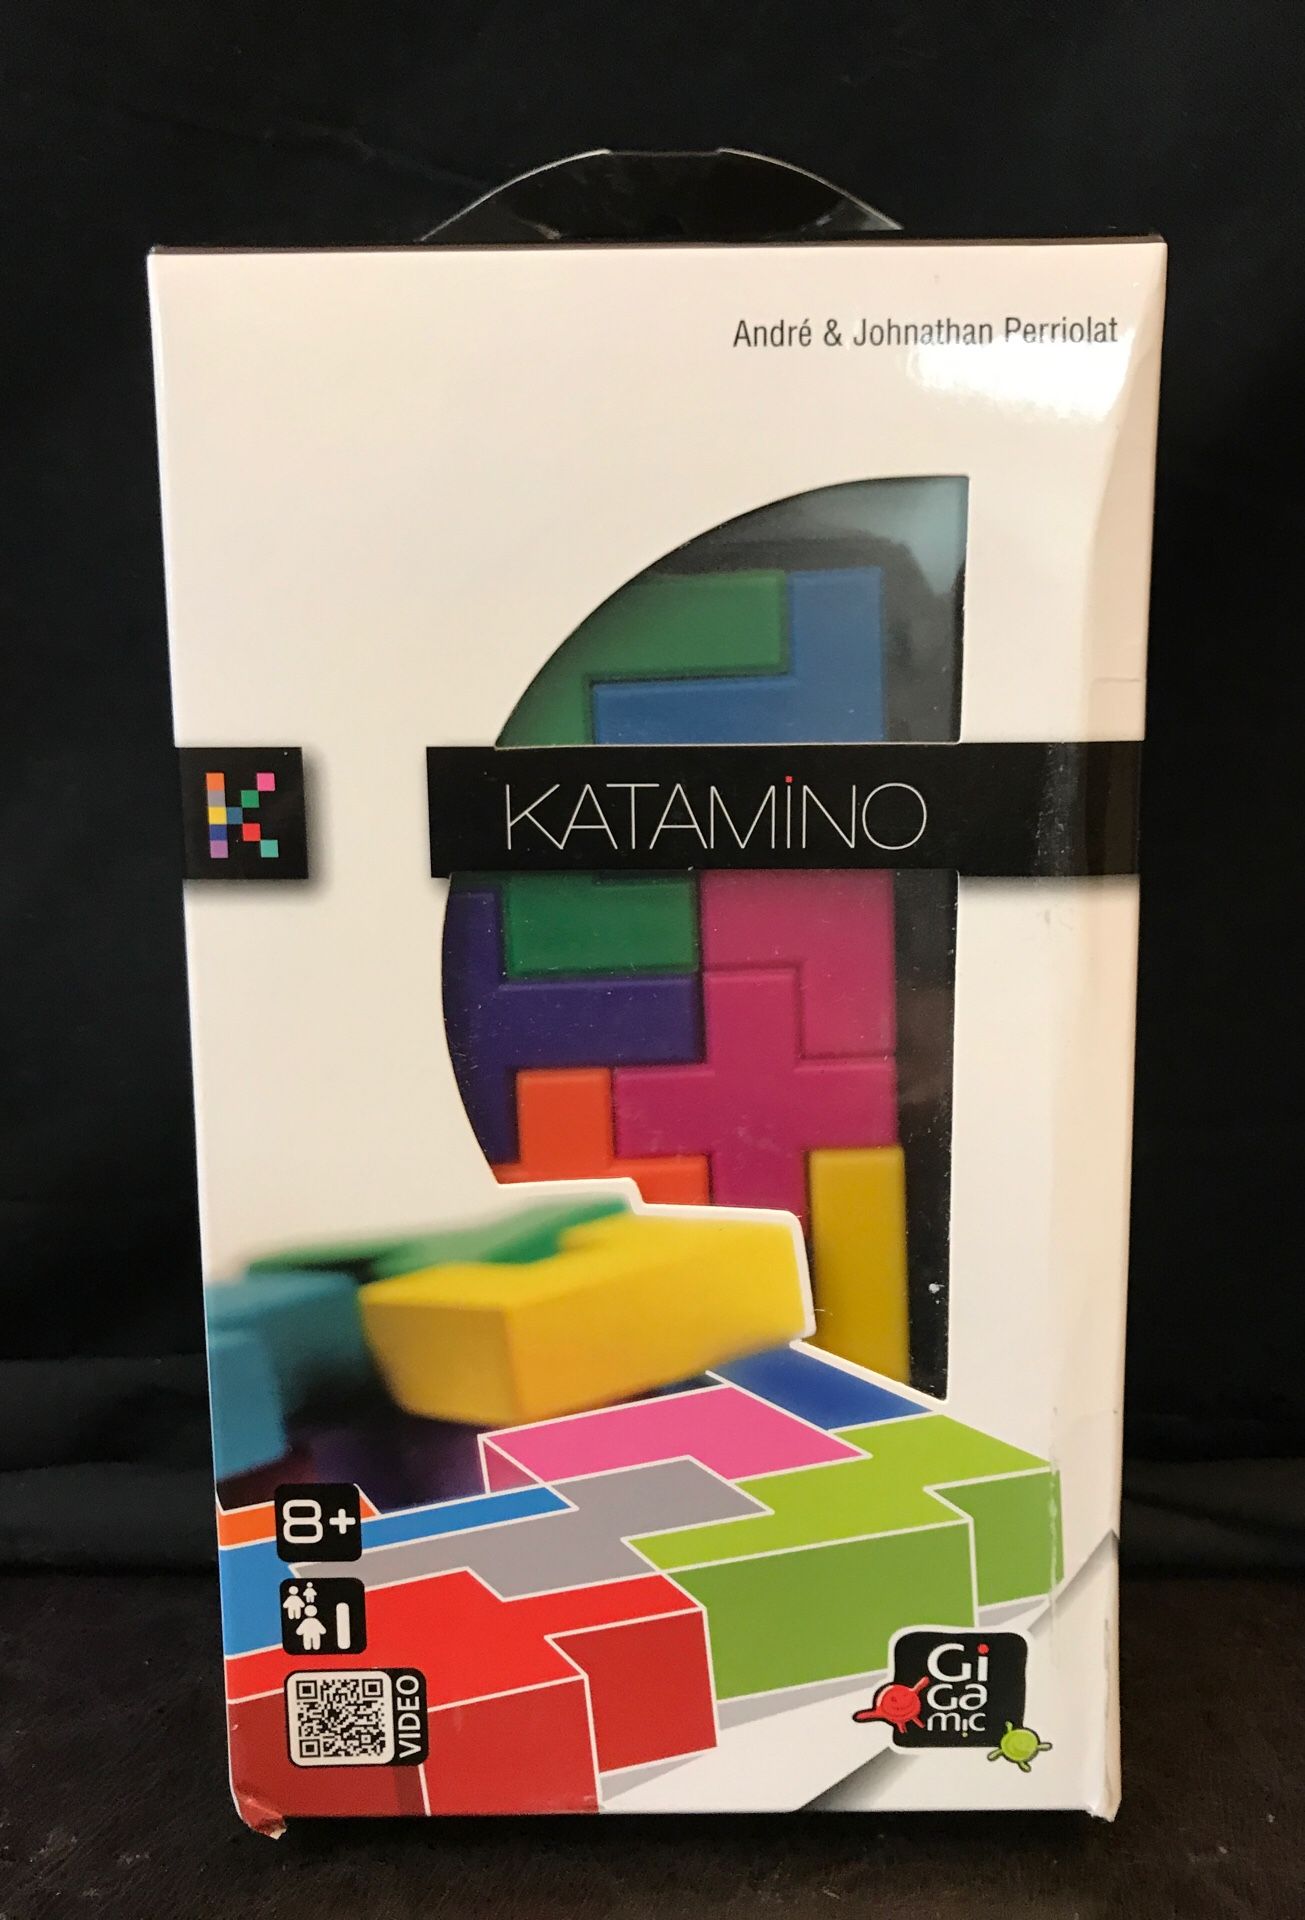 Gigamic-KATAMINO. Pocket- Puzzle Game For one player. Travel size.